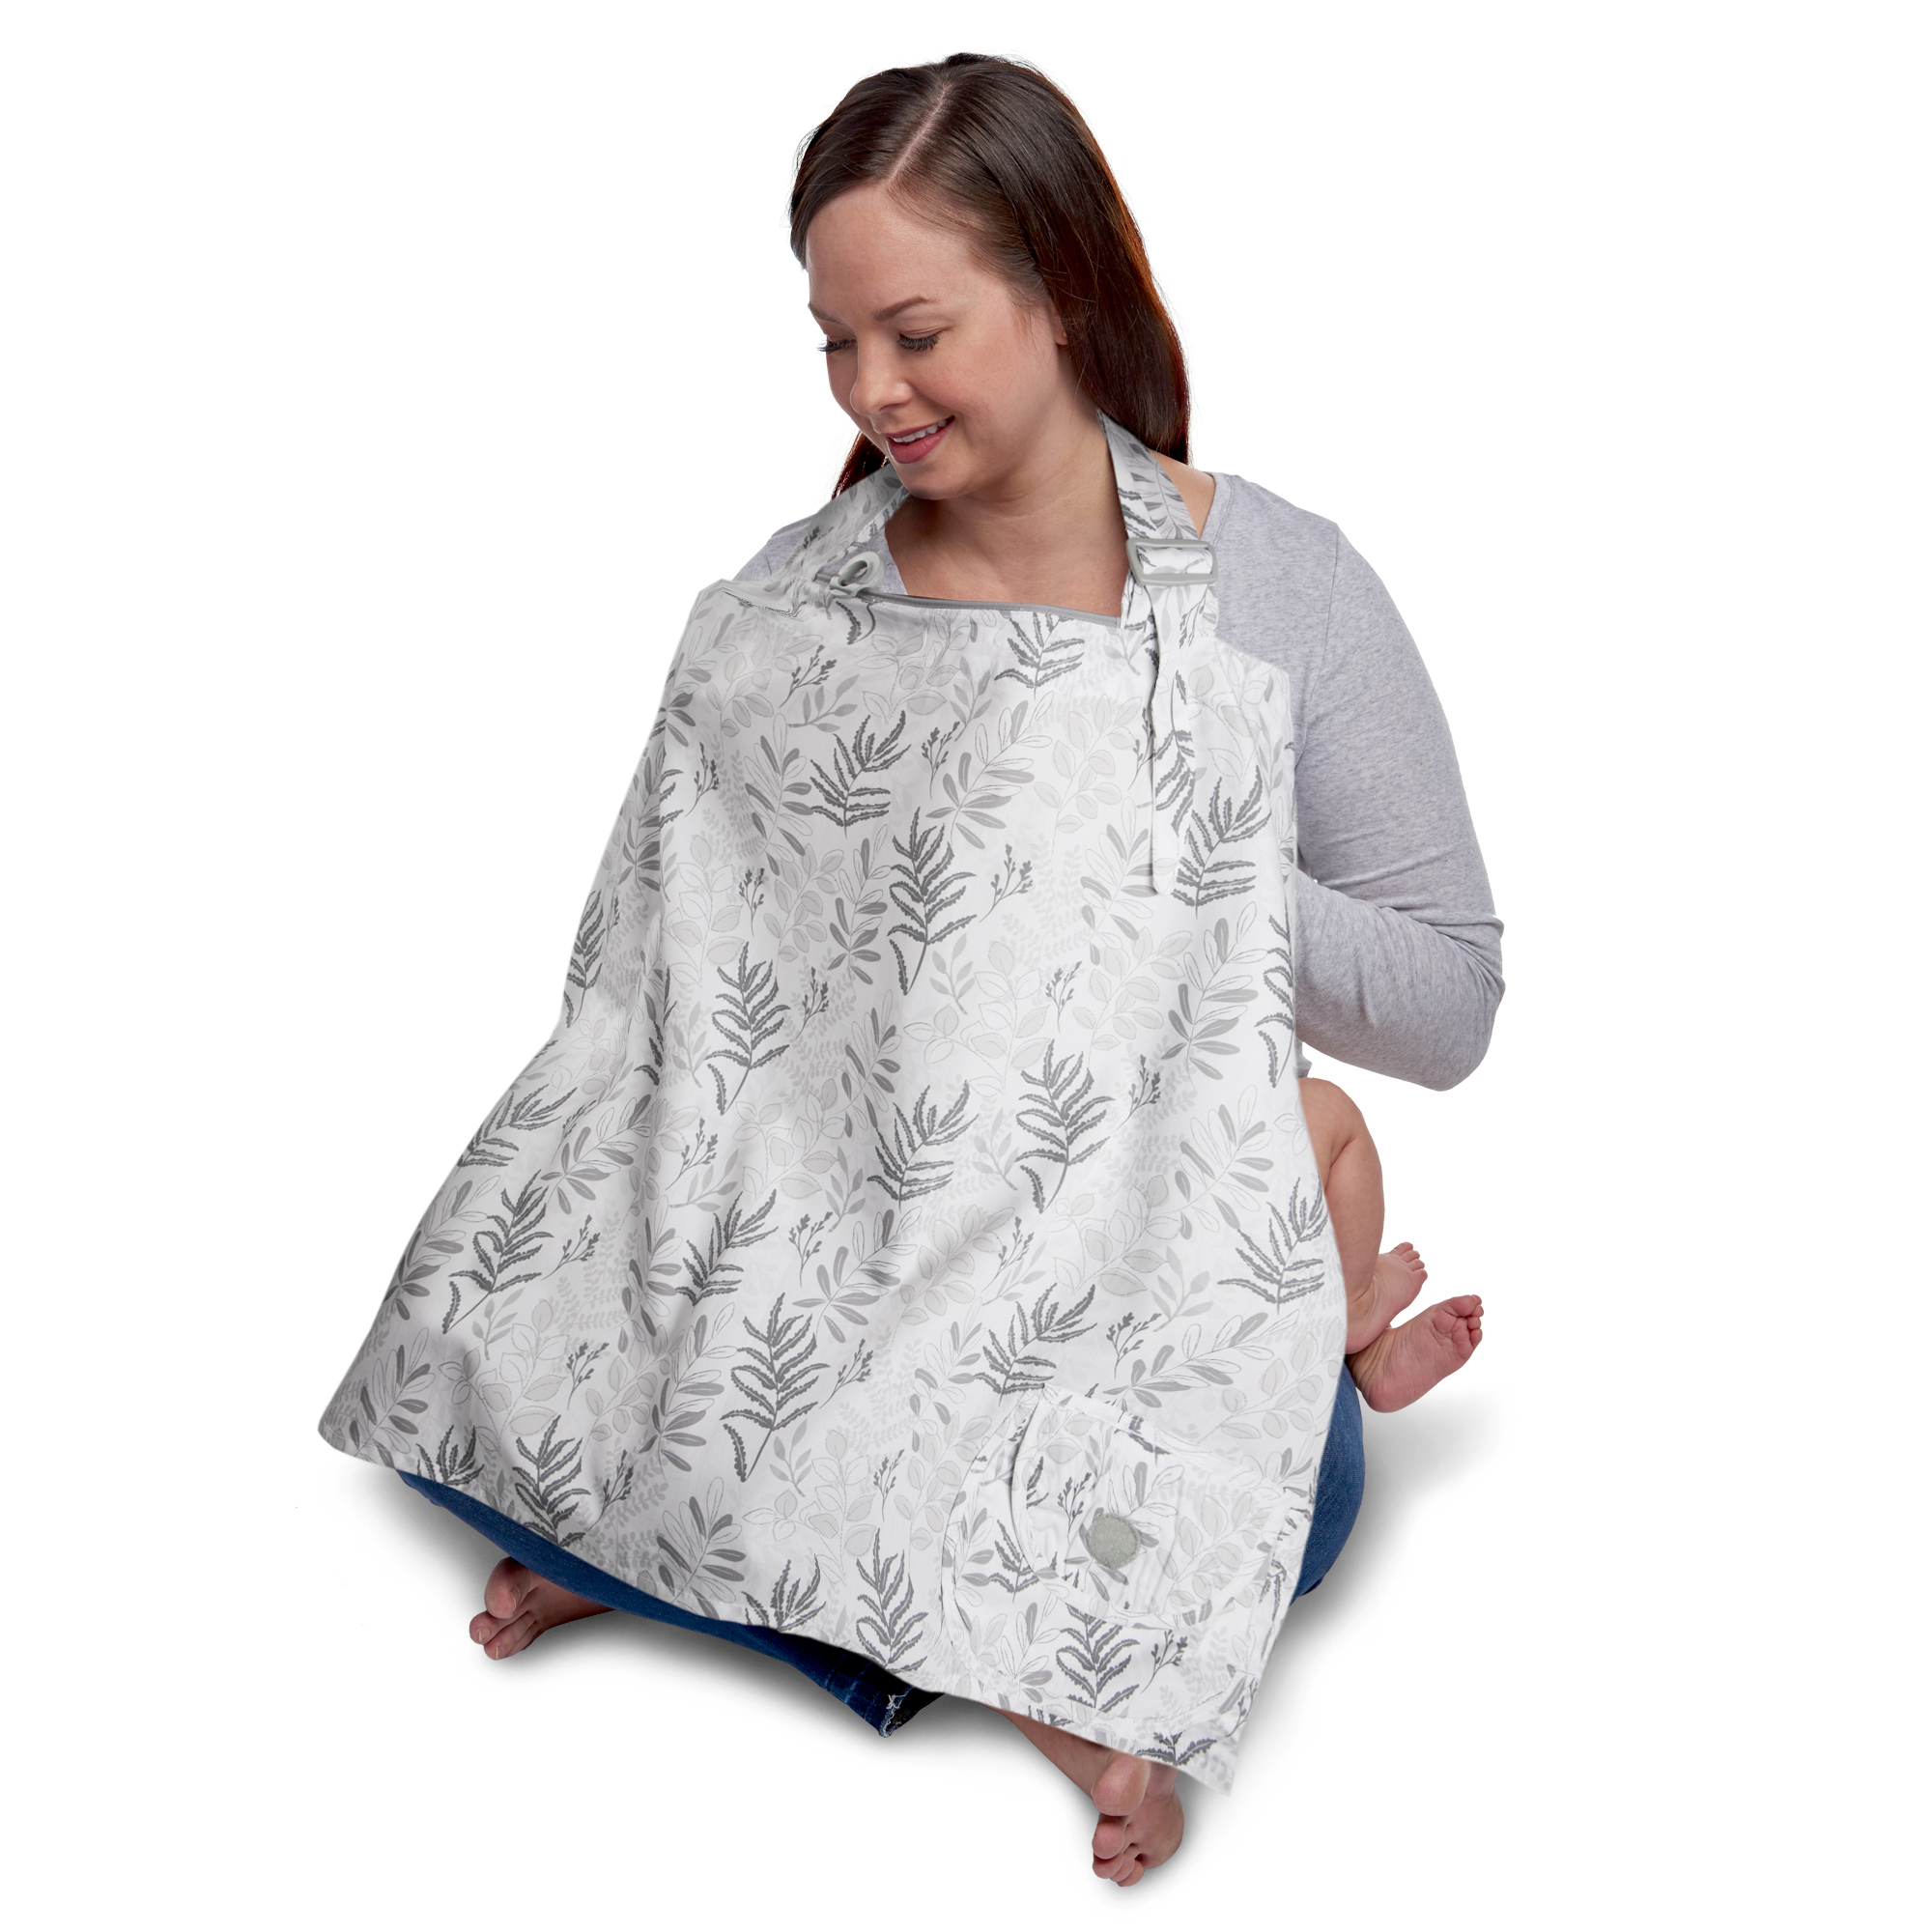 Boppy Nursing Cover for Breastfeeding, Gray Ferns, Apron Style with Storage Pocket, Rigid Neckline to See Baby While Feeding, and Breastfeeding or Pumping Tracker - image 1 of 5